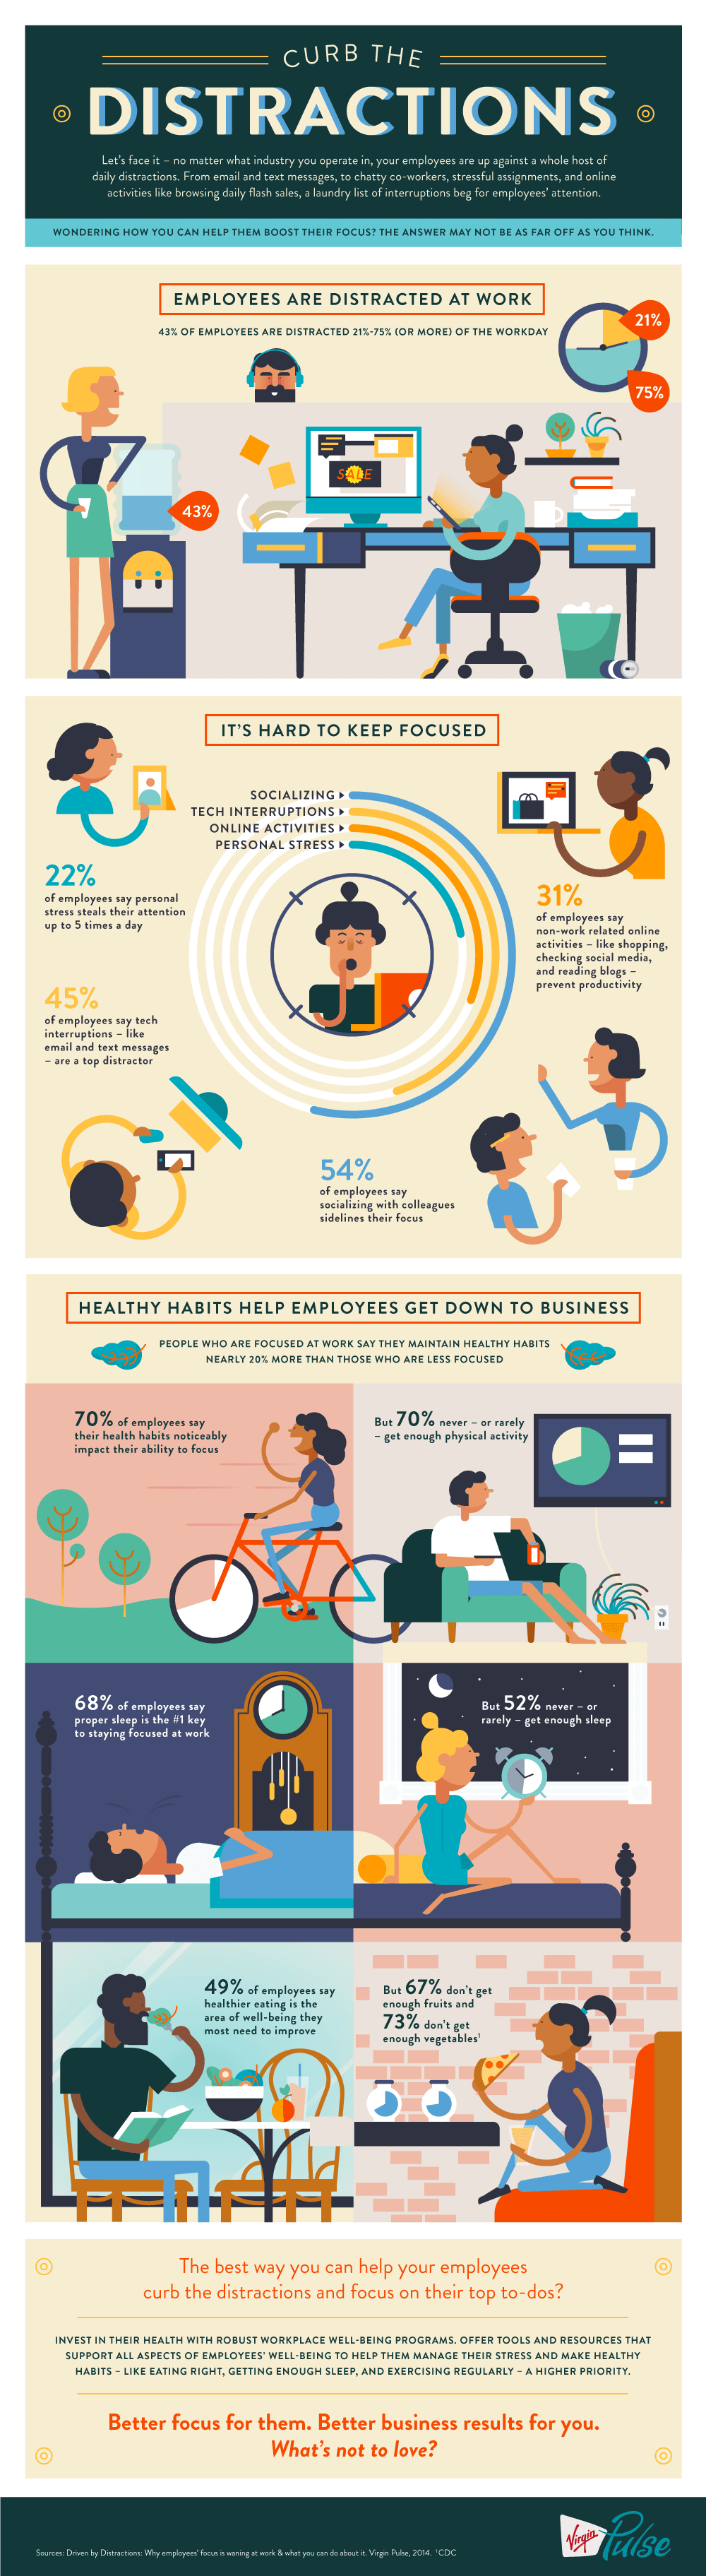 Virgin Pulse: Curb the Distractions Infographic